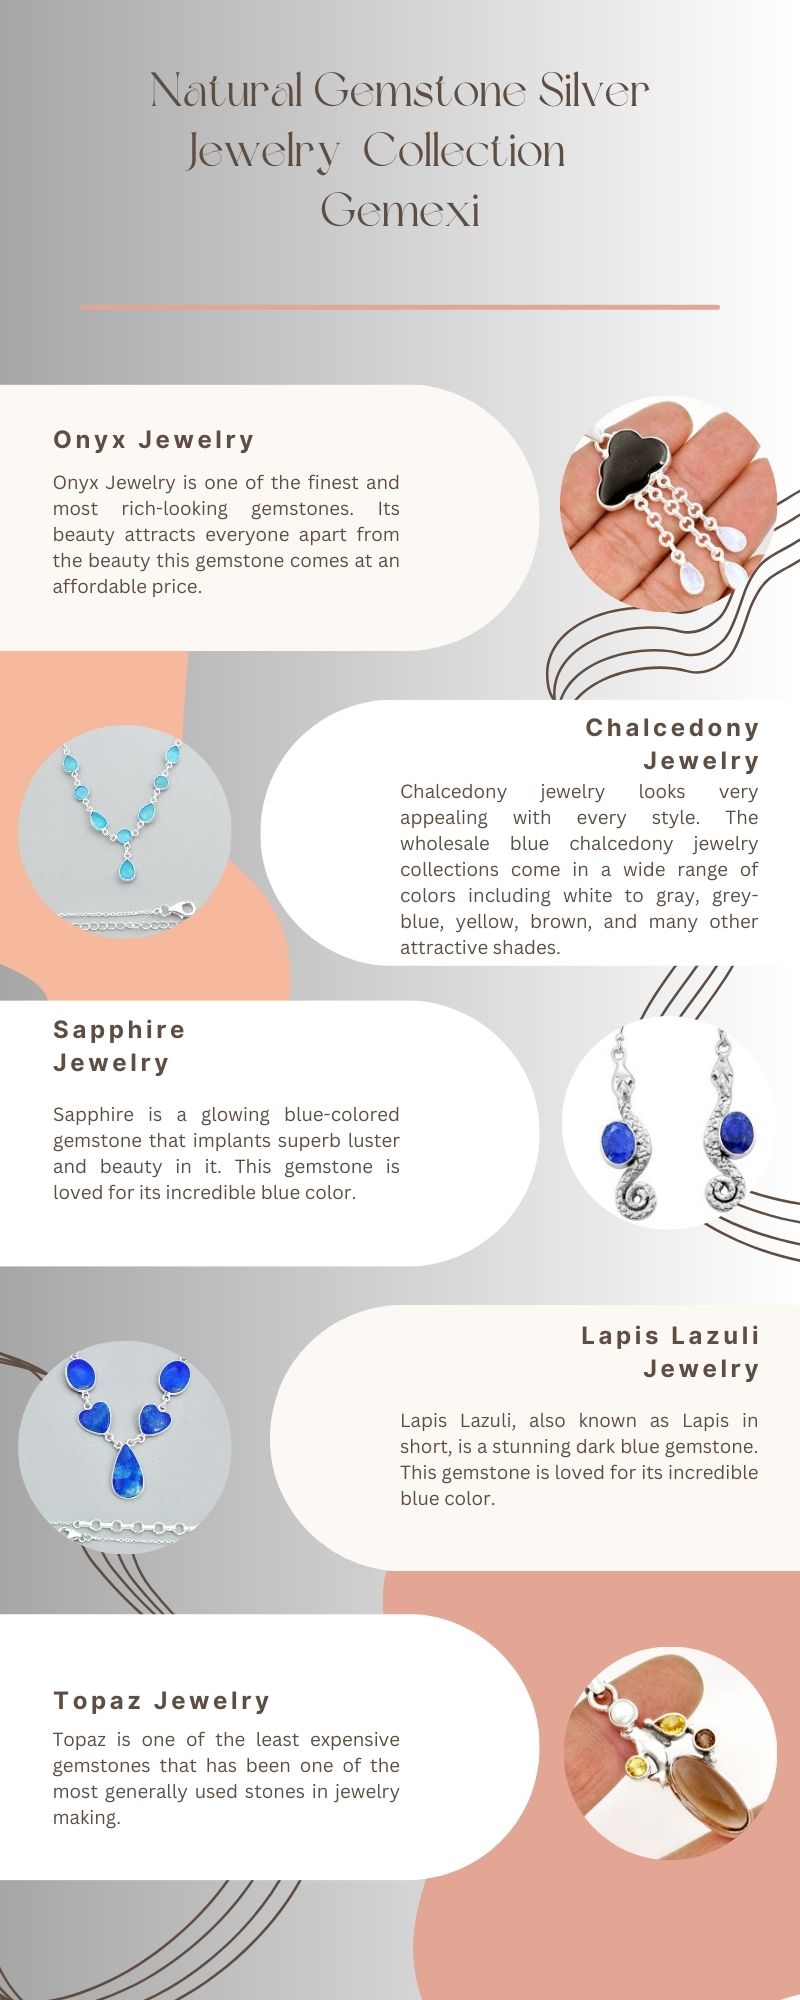 Natural Gemstone Silver Jewelry Collection | Gemexi